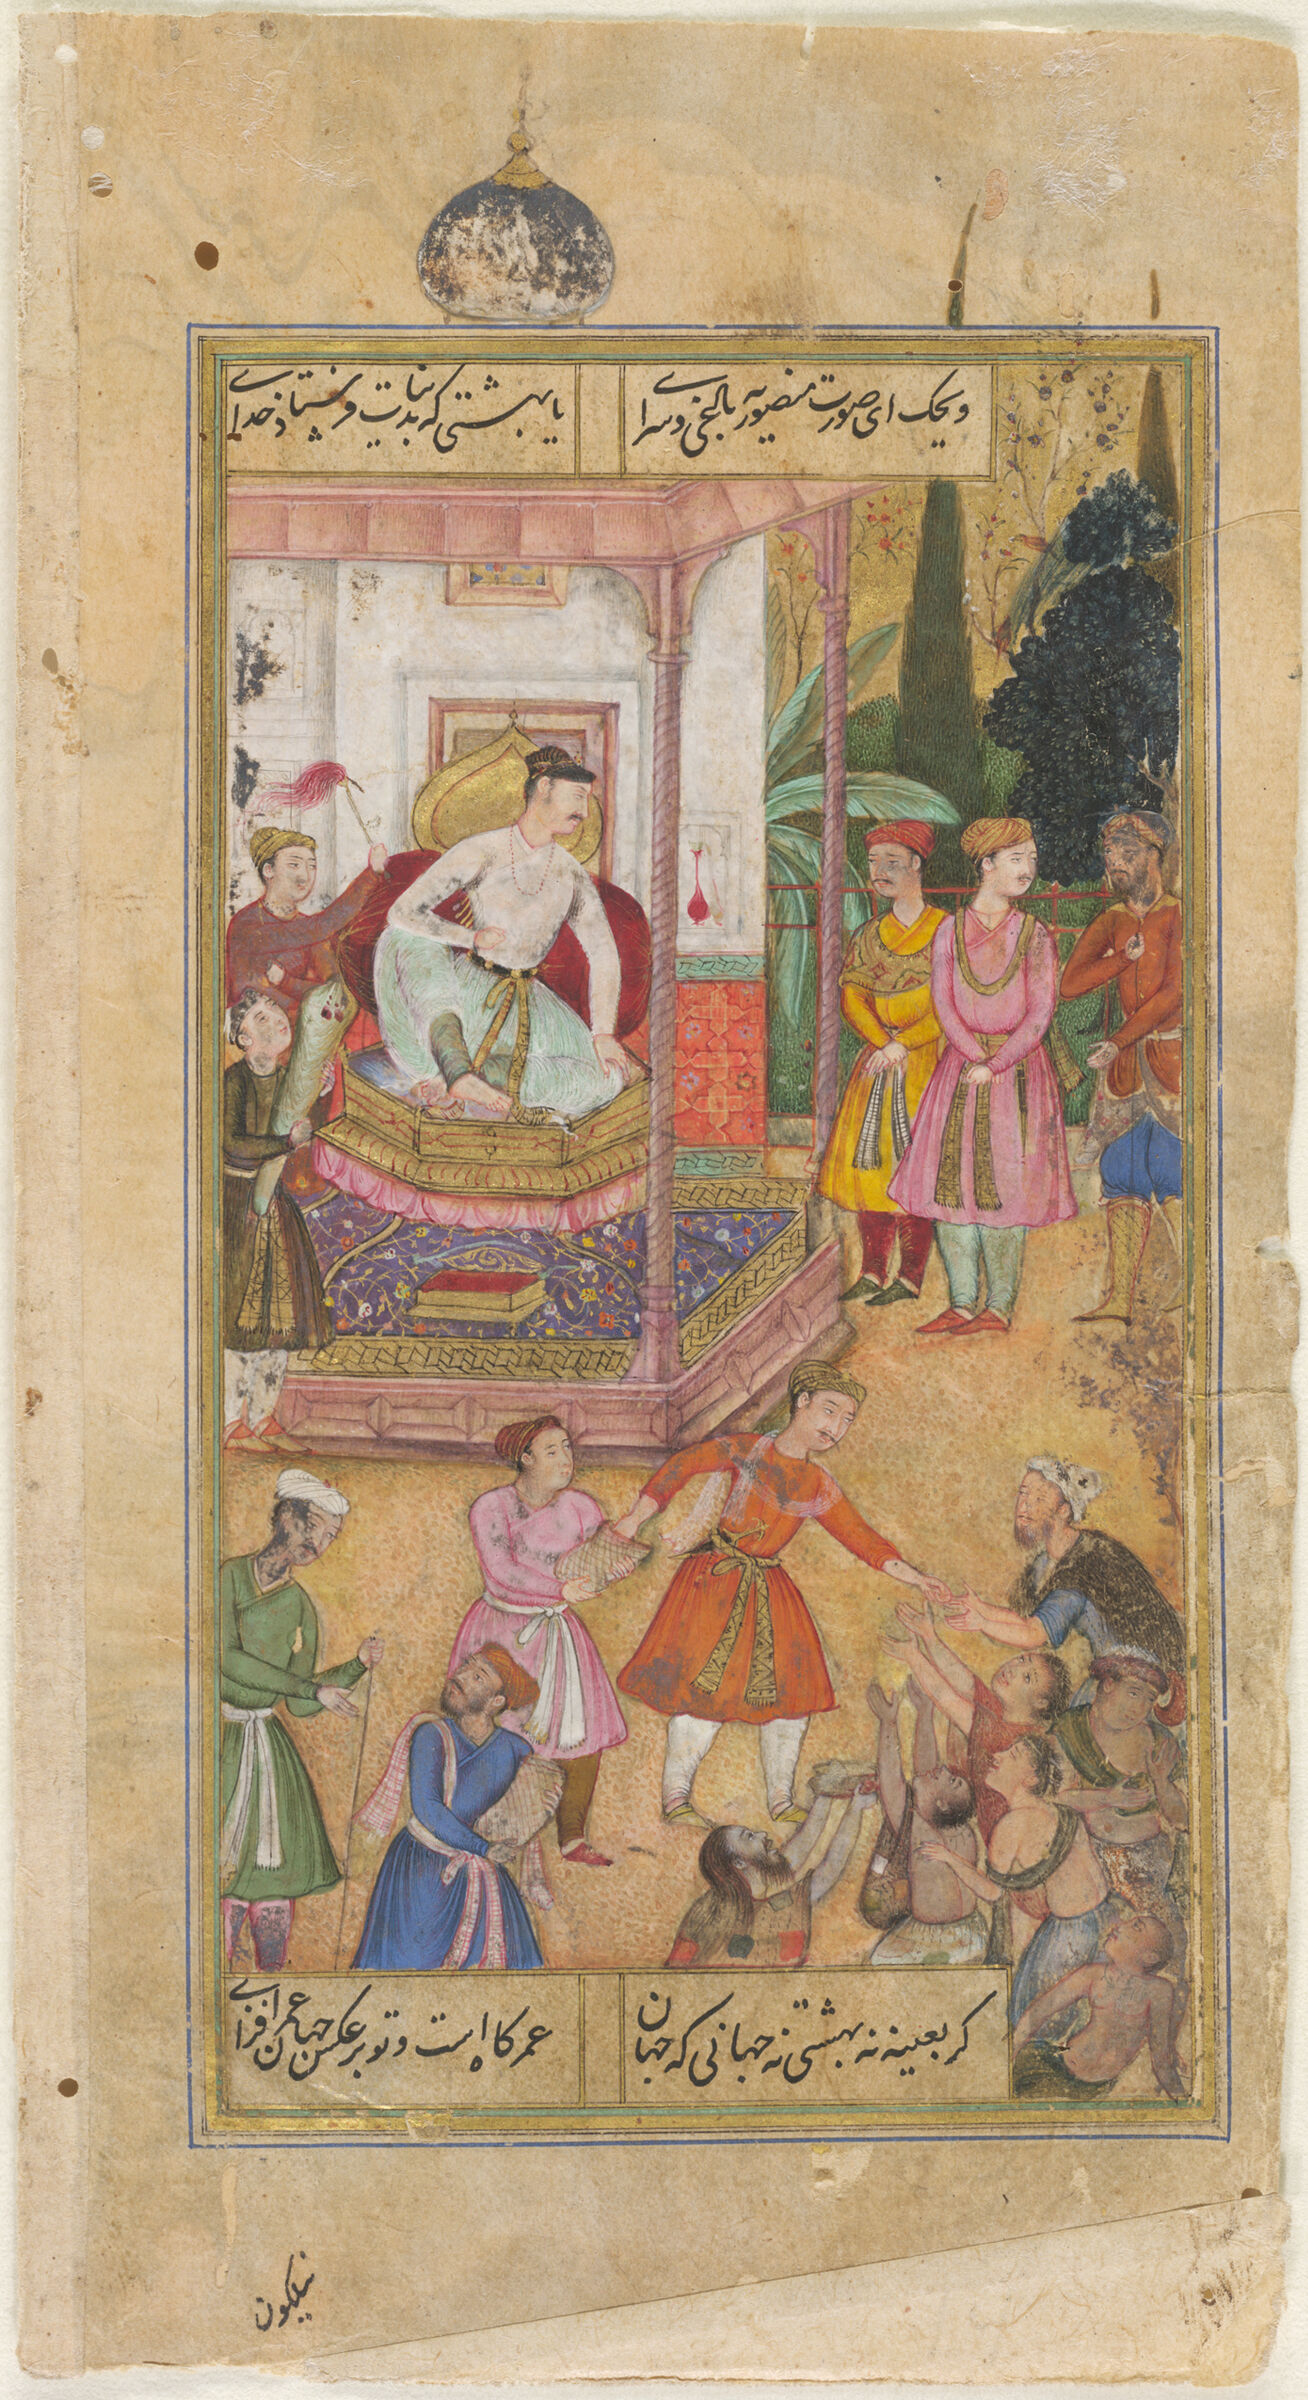 You Make Sweet Life Increase (Painting, Verso; Text, Recto), Folio 208 From A Manuscript Of The Divan (Collection Of Works) Of Anvari